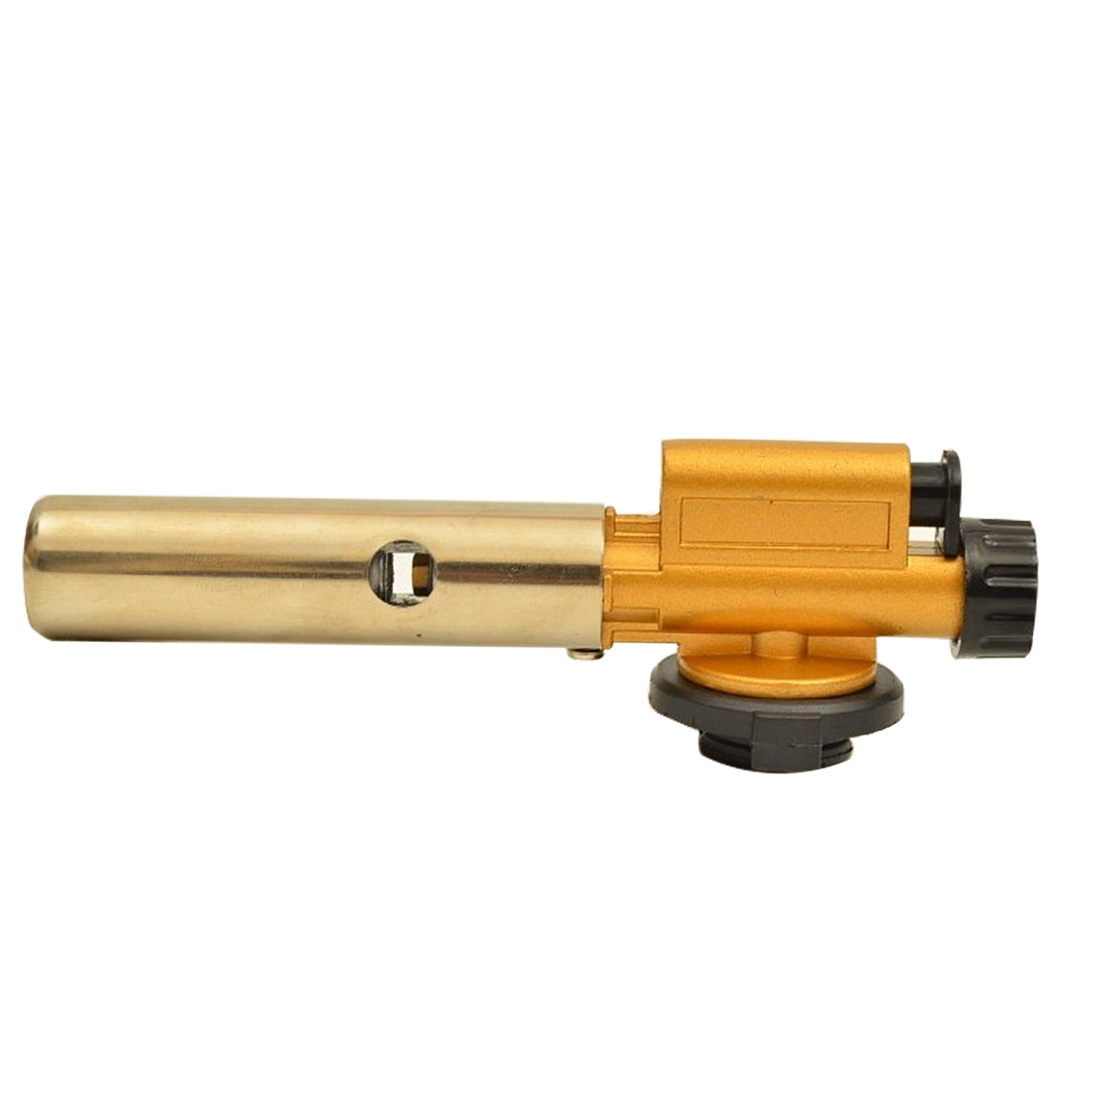 Electronic Ignition Copper Flame Gas Burners Gun Maker Torch Lighter For Outdoor Camping Picnic BBQ Welding Equipment